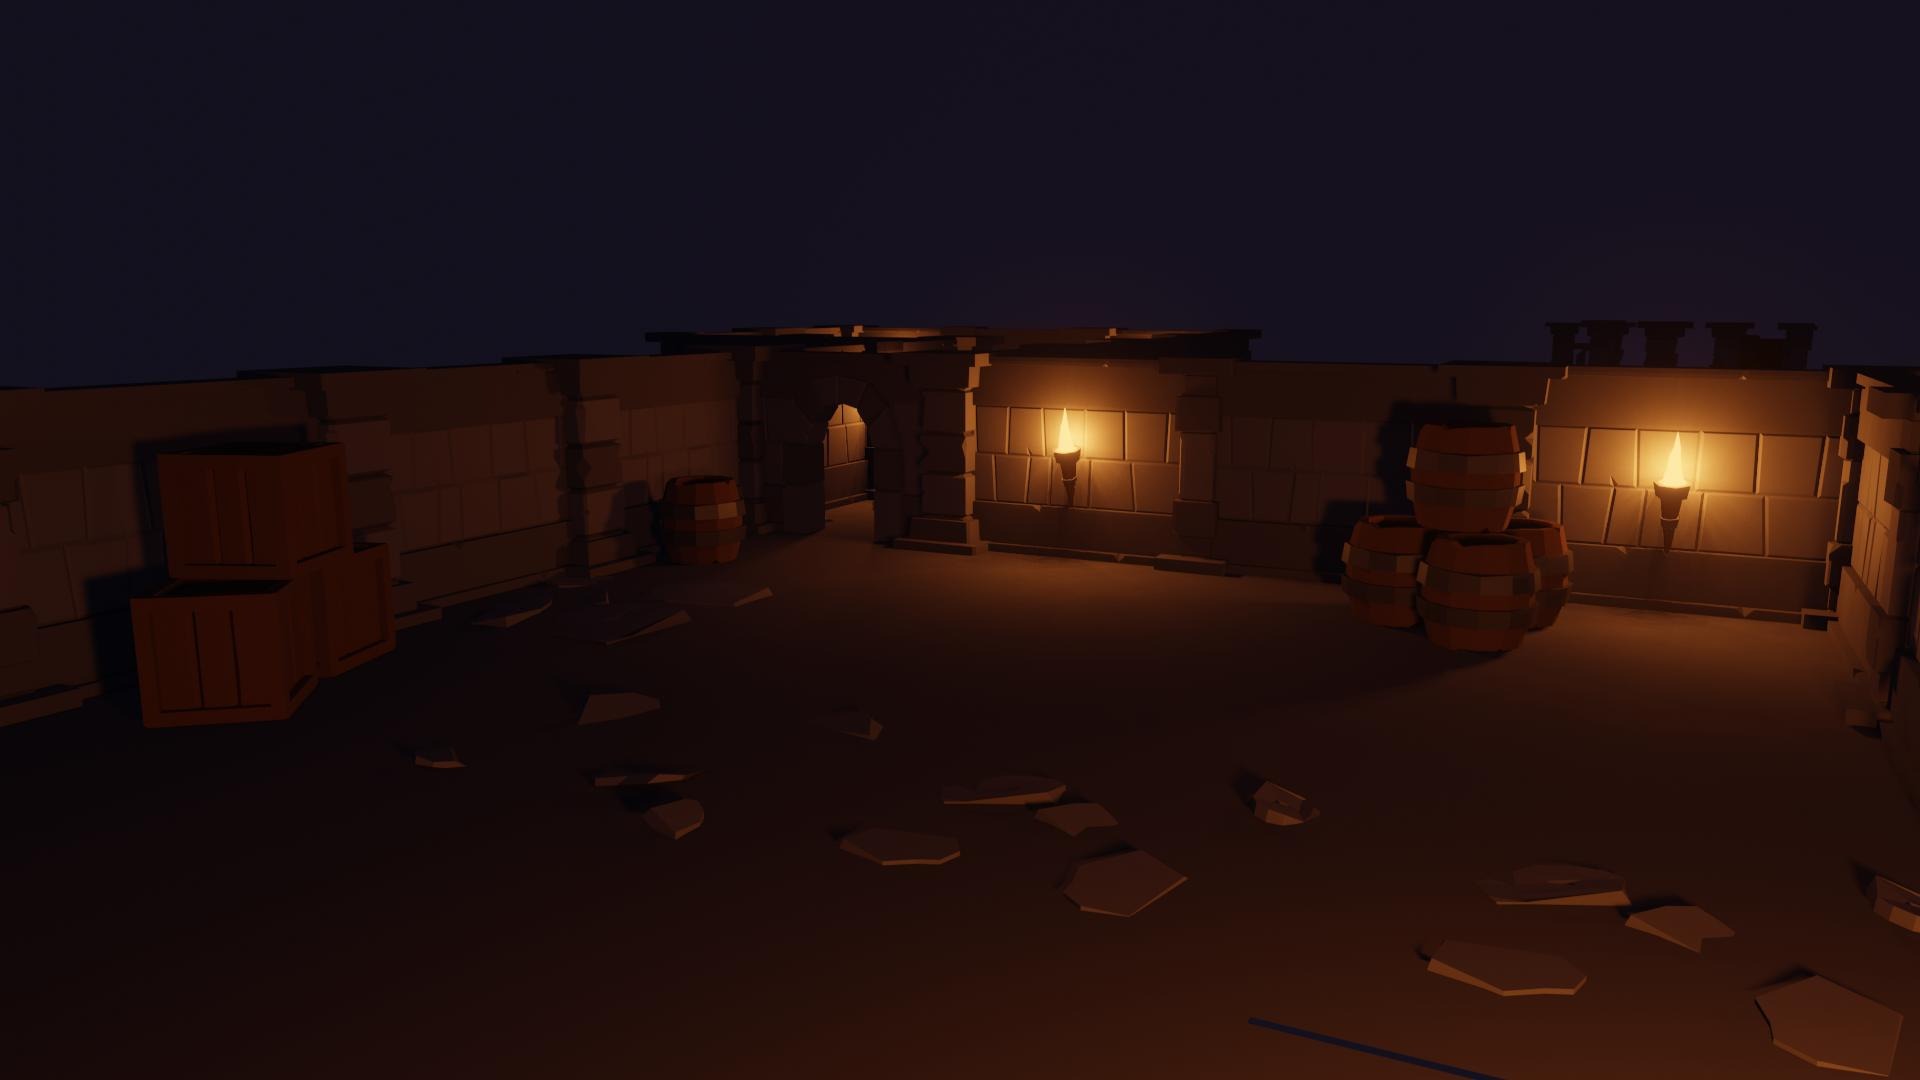 Low poly dungeon built from modular models